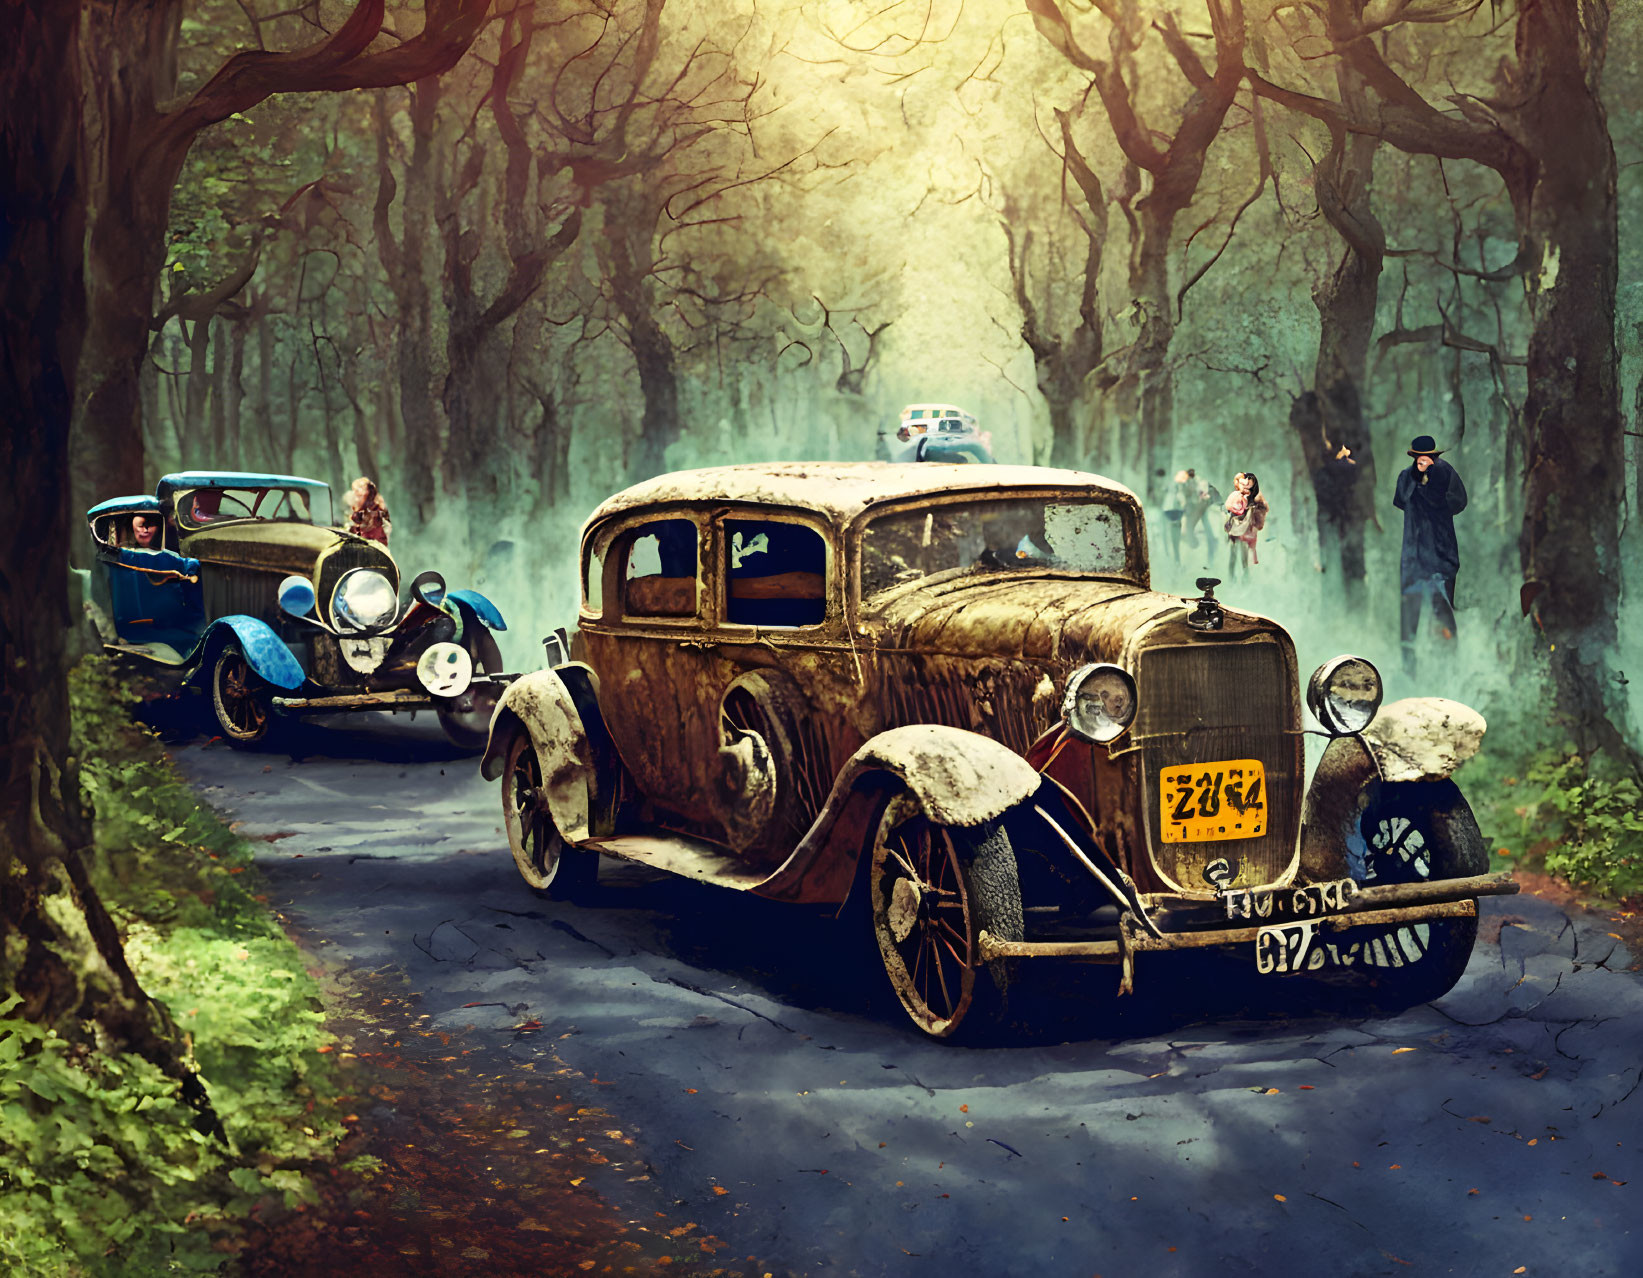 Vintage Cars and People in Period Clothing on Forest Road